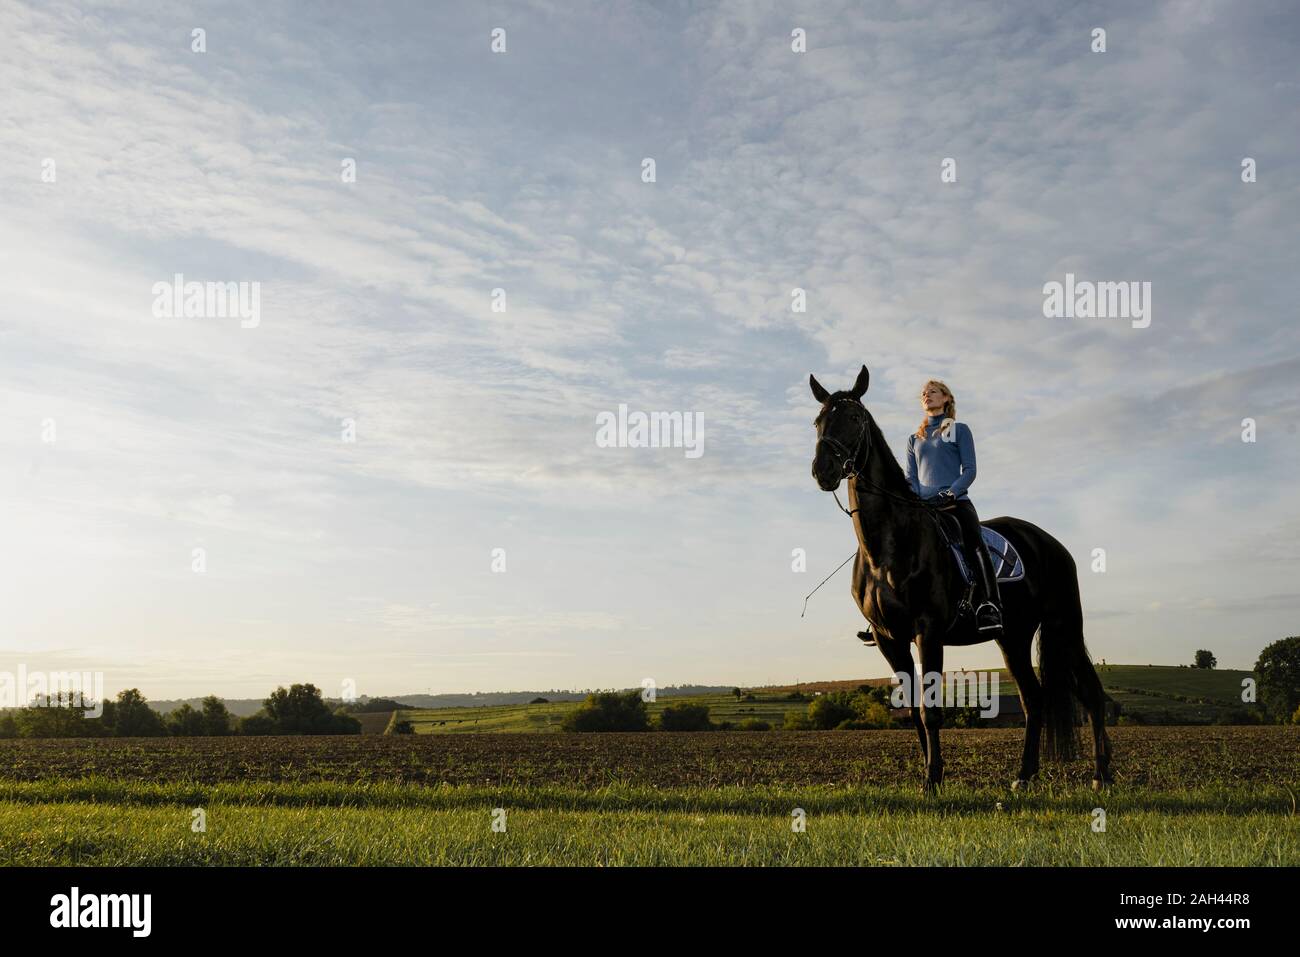 Woman on horse on a field in the countryside Stock Photo